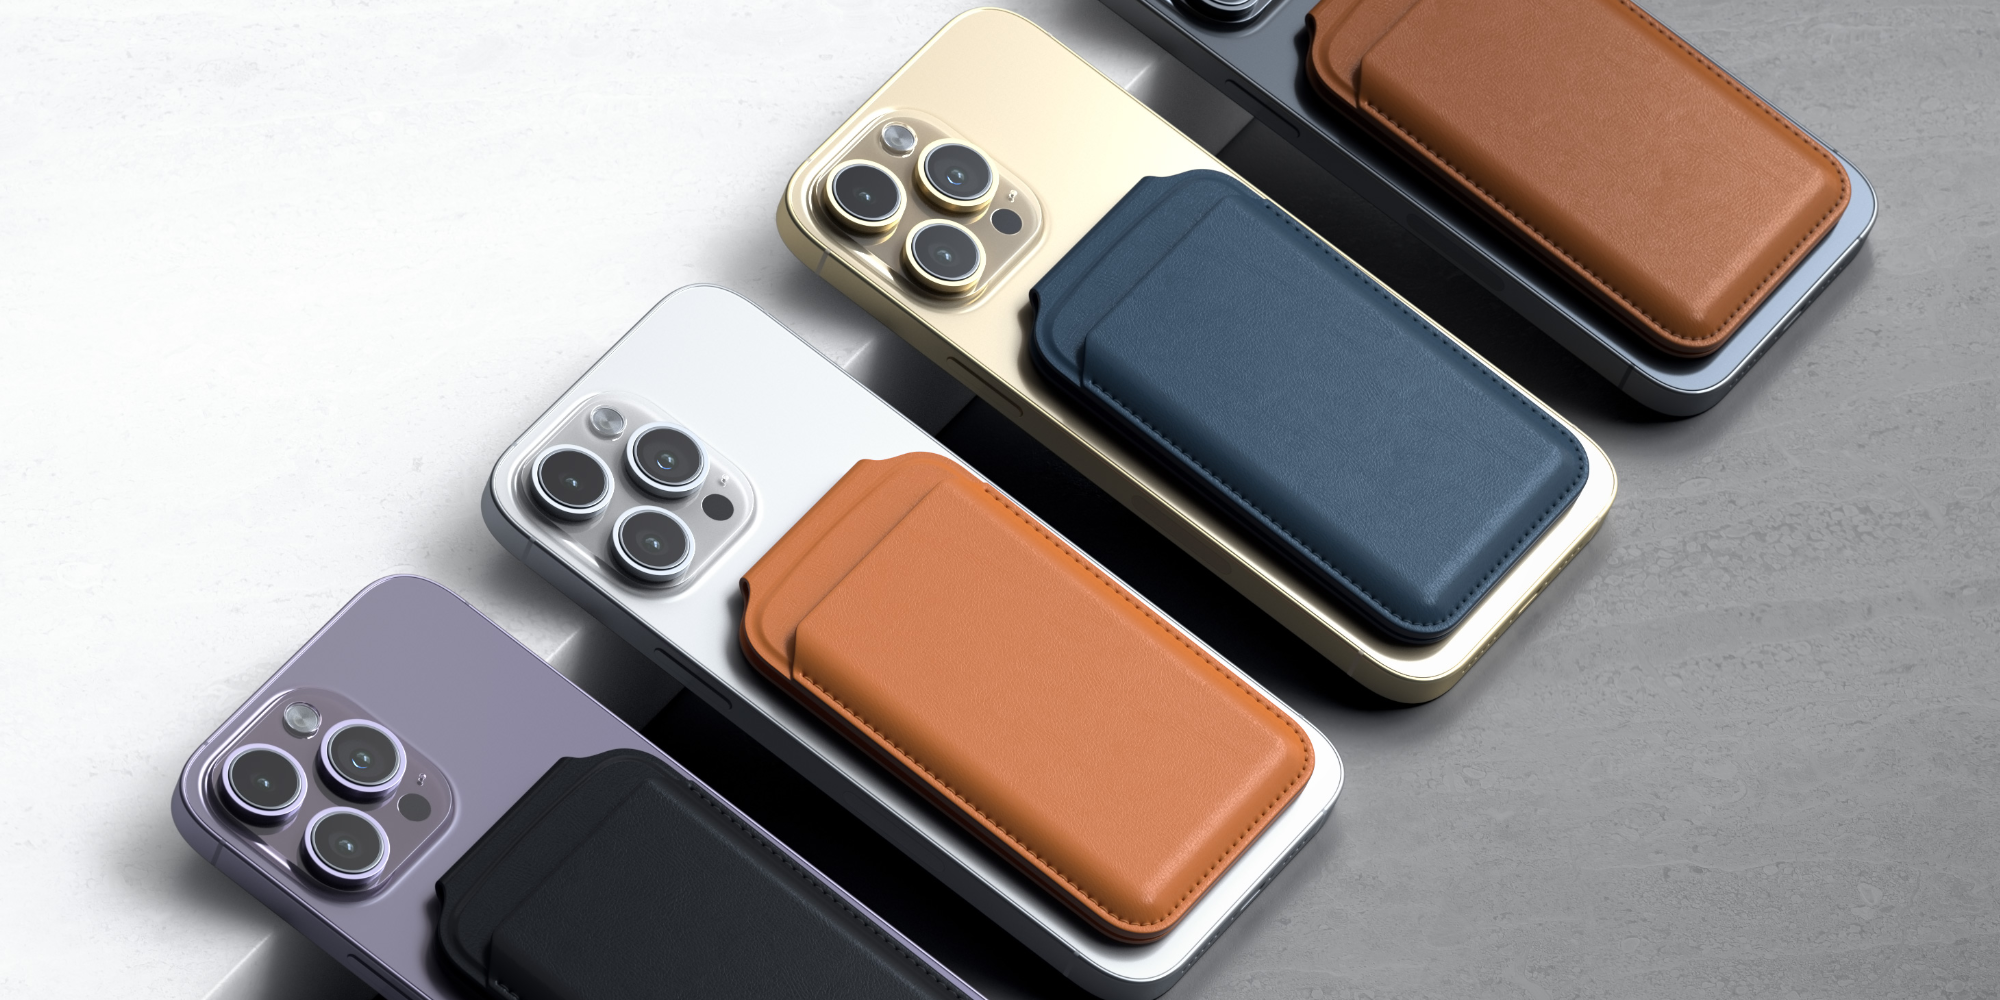 Satechi MagSafe Wallet Stand debuts in four vegan leather designs